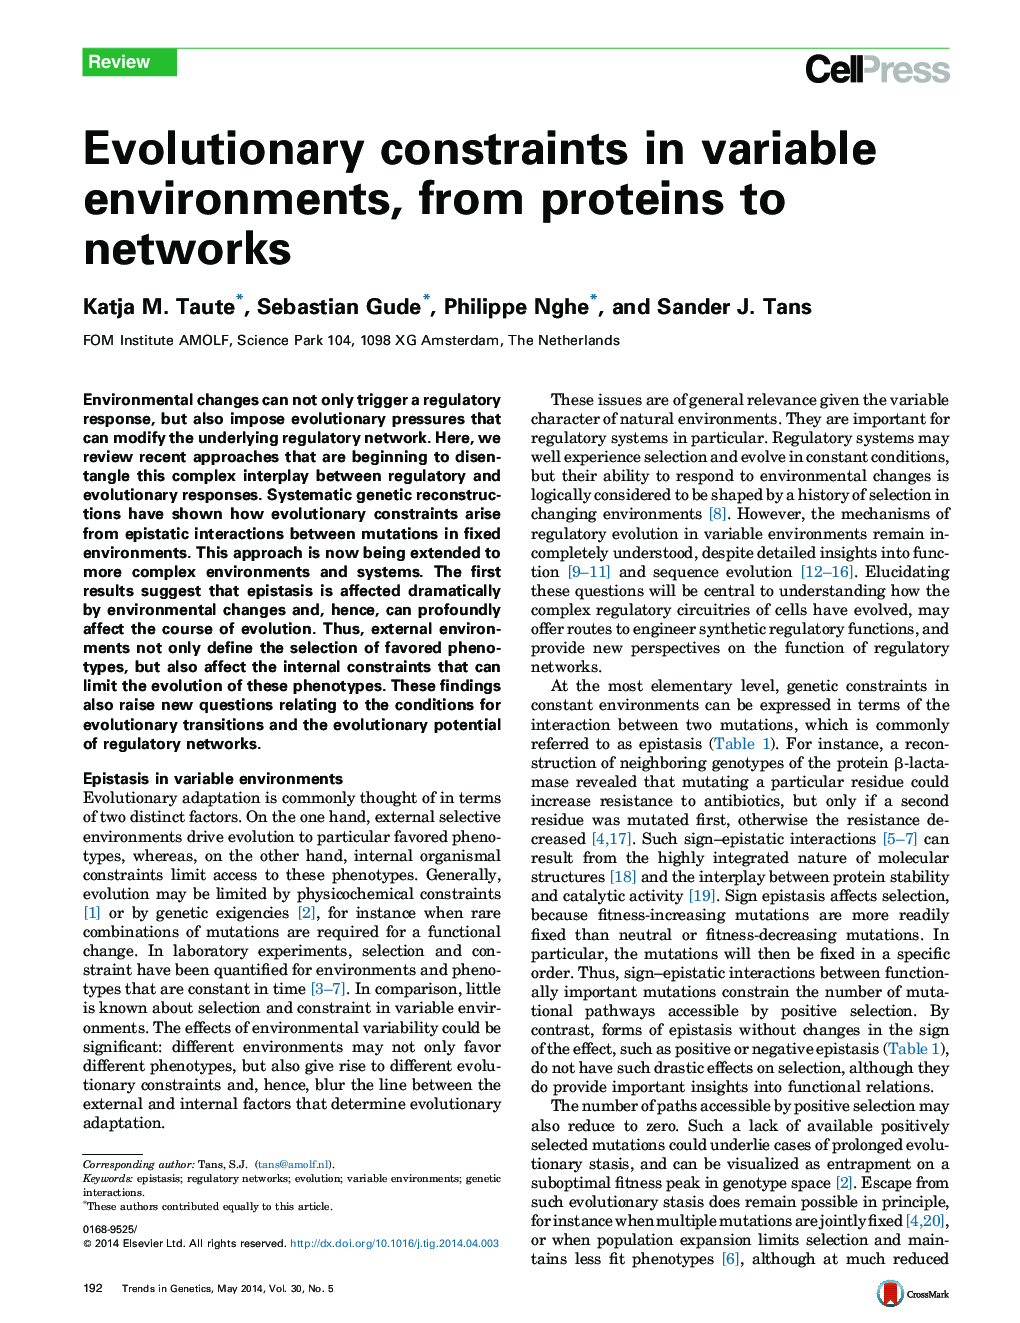 Evolutionary constraints in variable environments, from proteins to networks